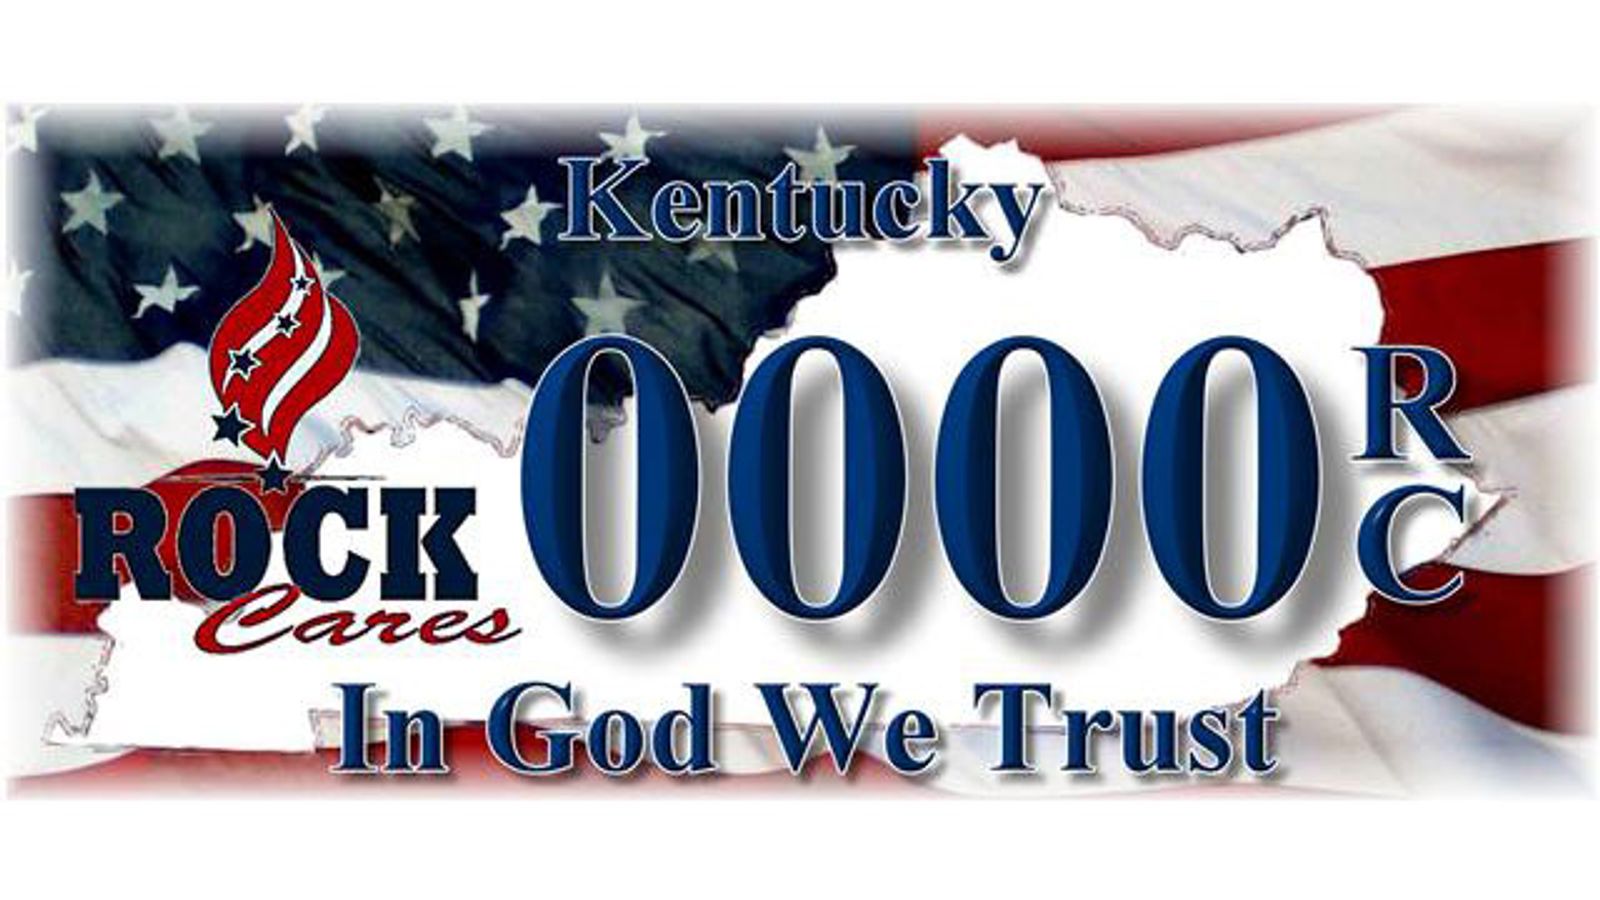 Anti-Porn Group Finally Gets Its Kentucky License Plate